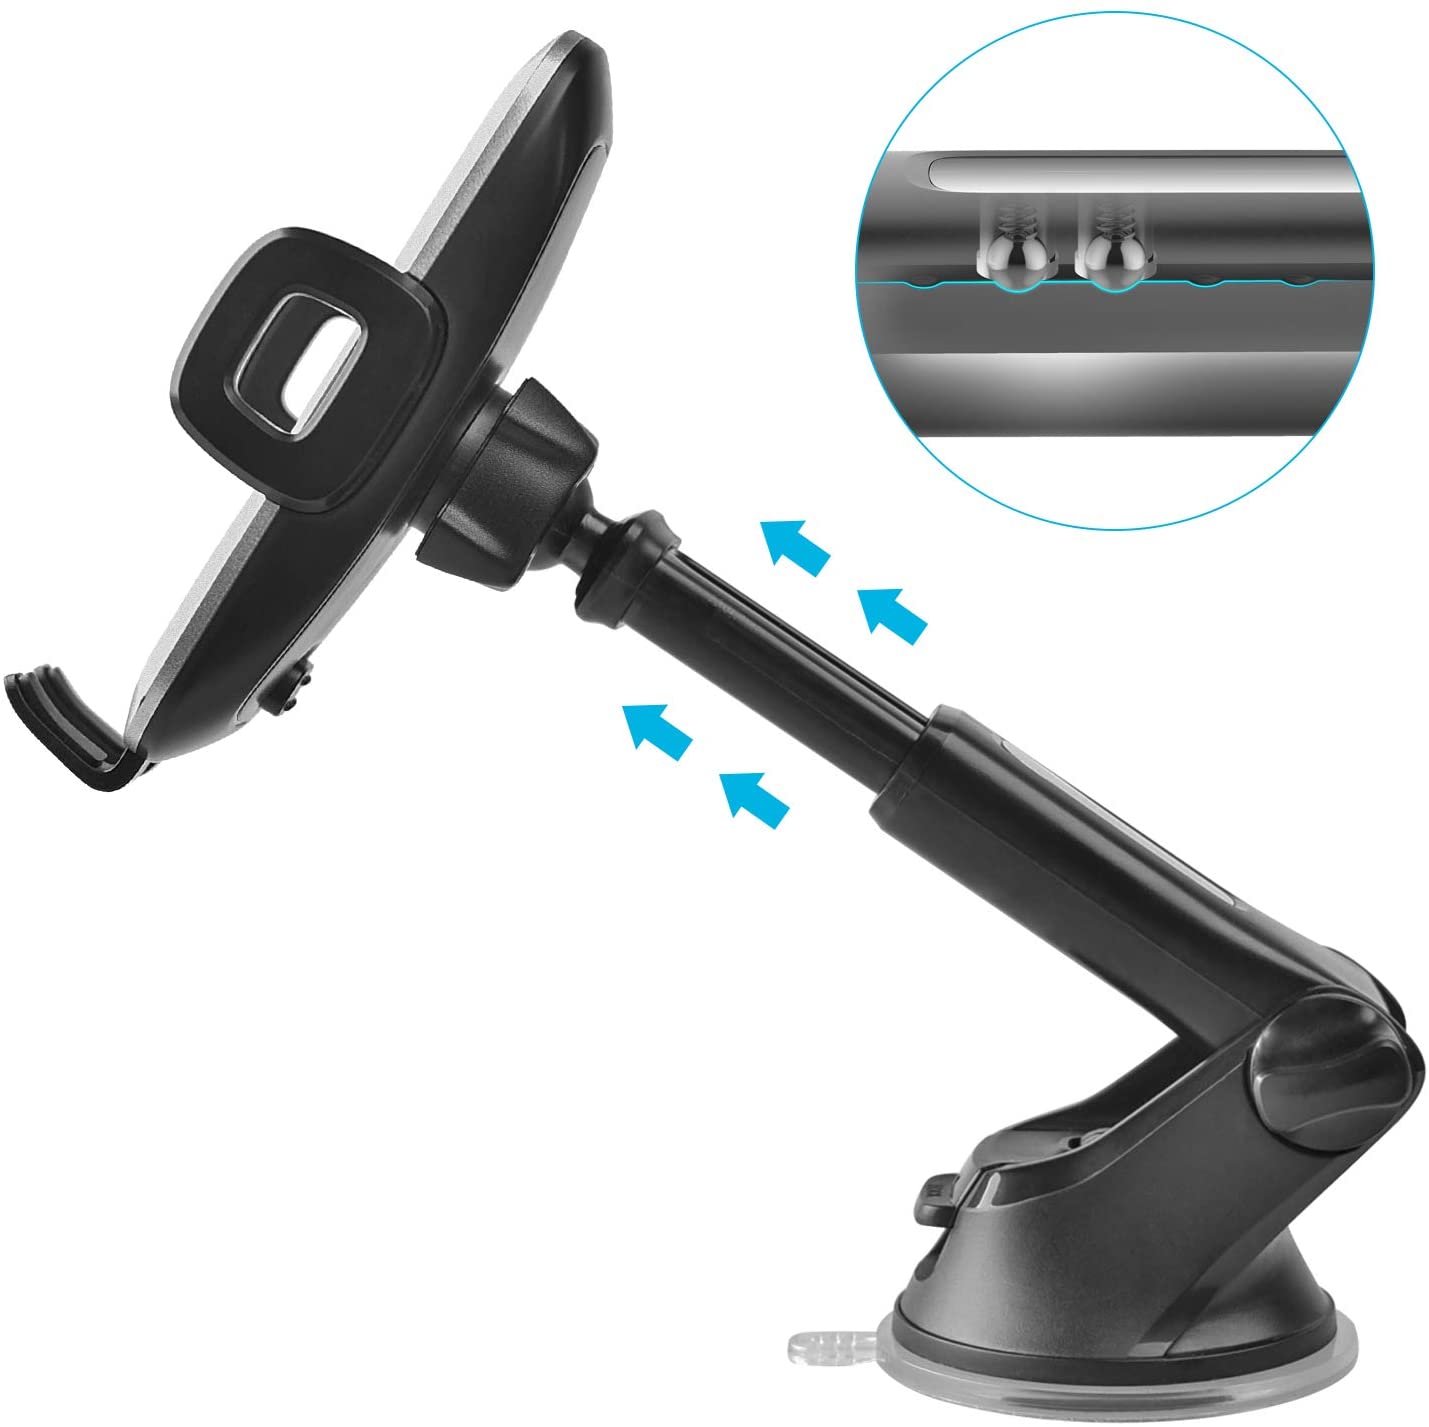 Suction Cup Phone Mount with Three-Side Protections and Adjustable Telescopic Arm [Quick One Hand Extension] - e4cents